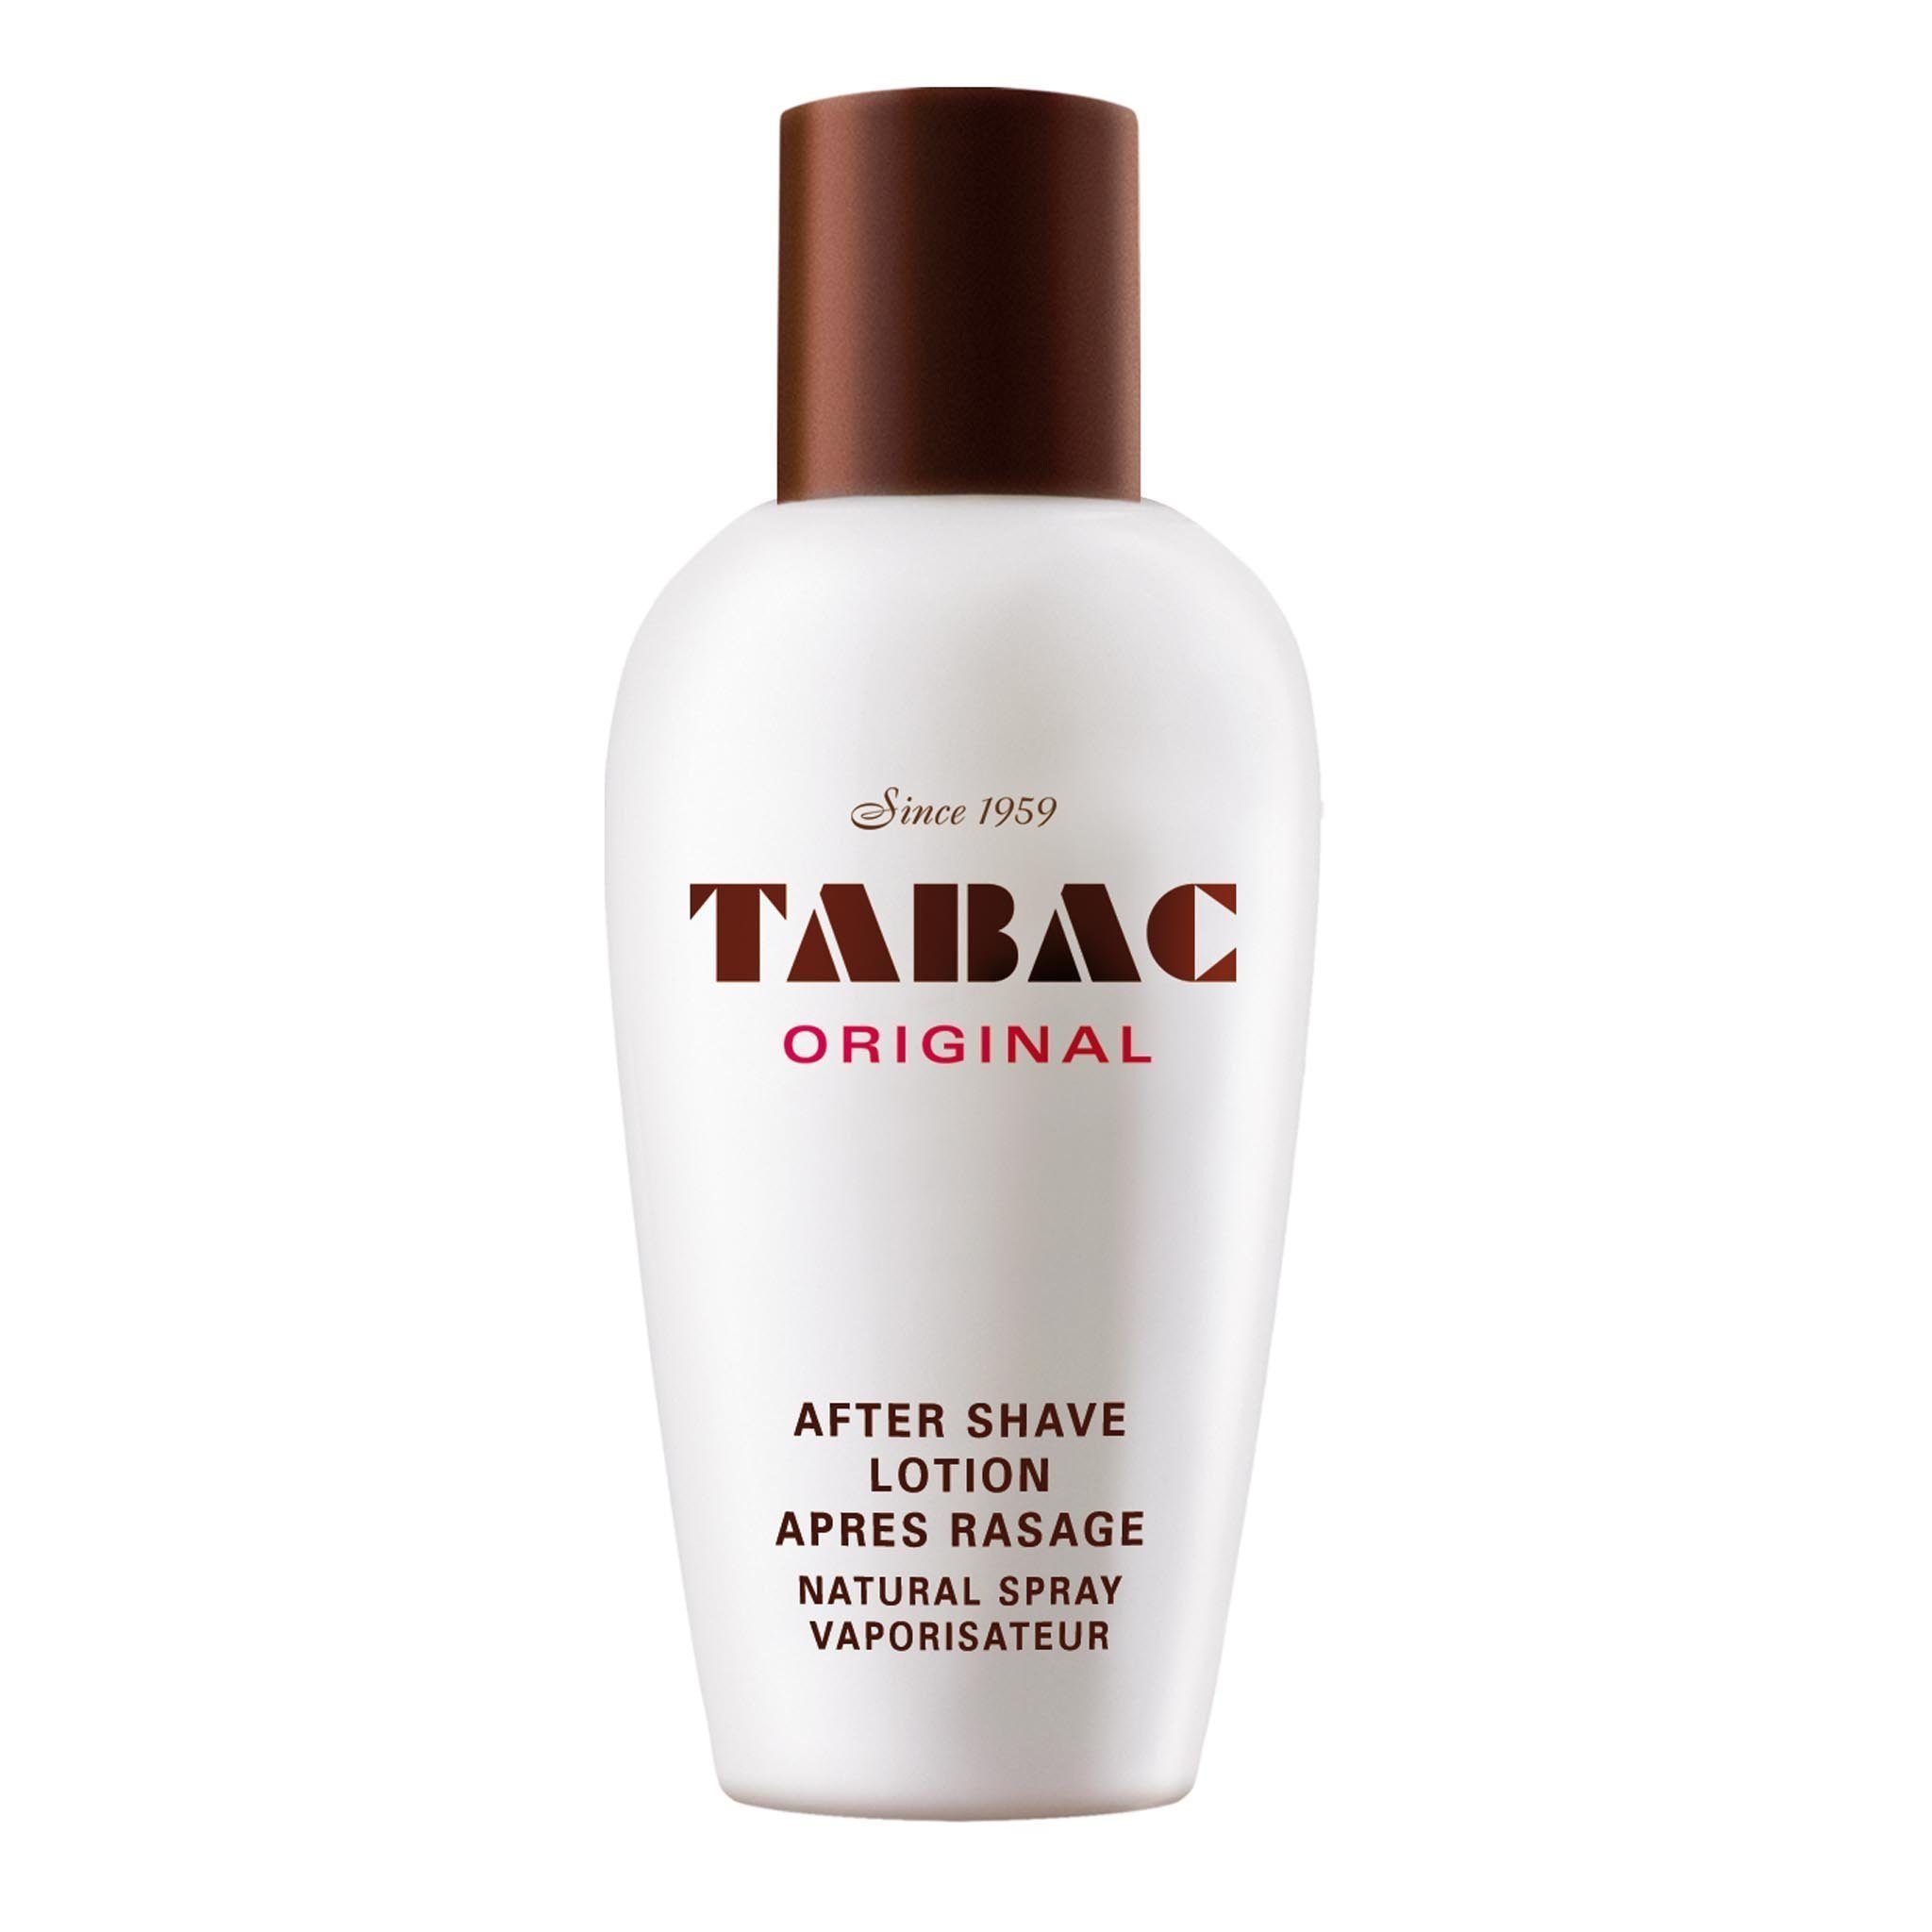 Tabac After Shave Lotion etterbarberingsvann